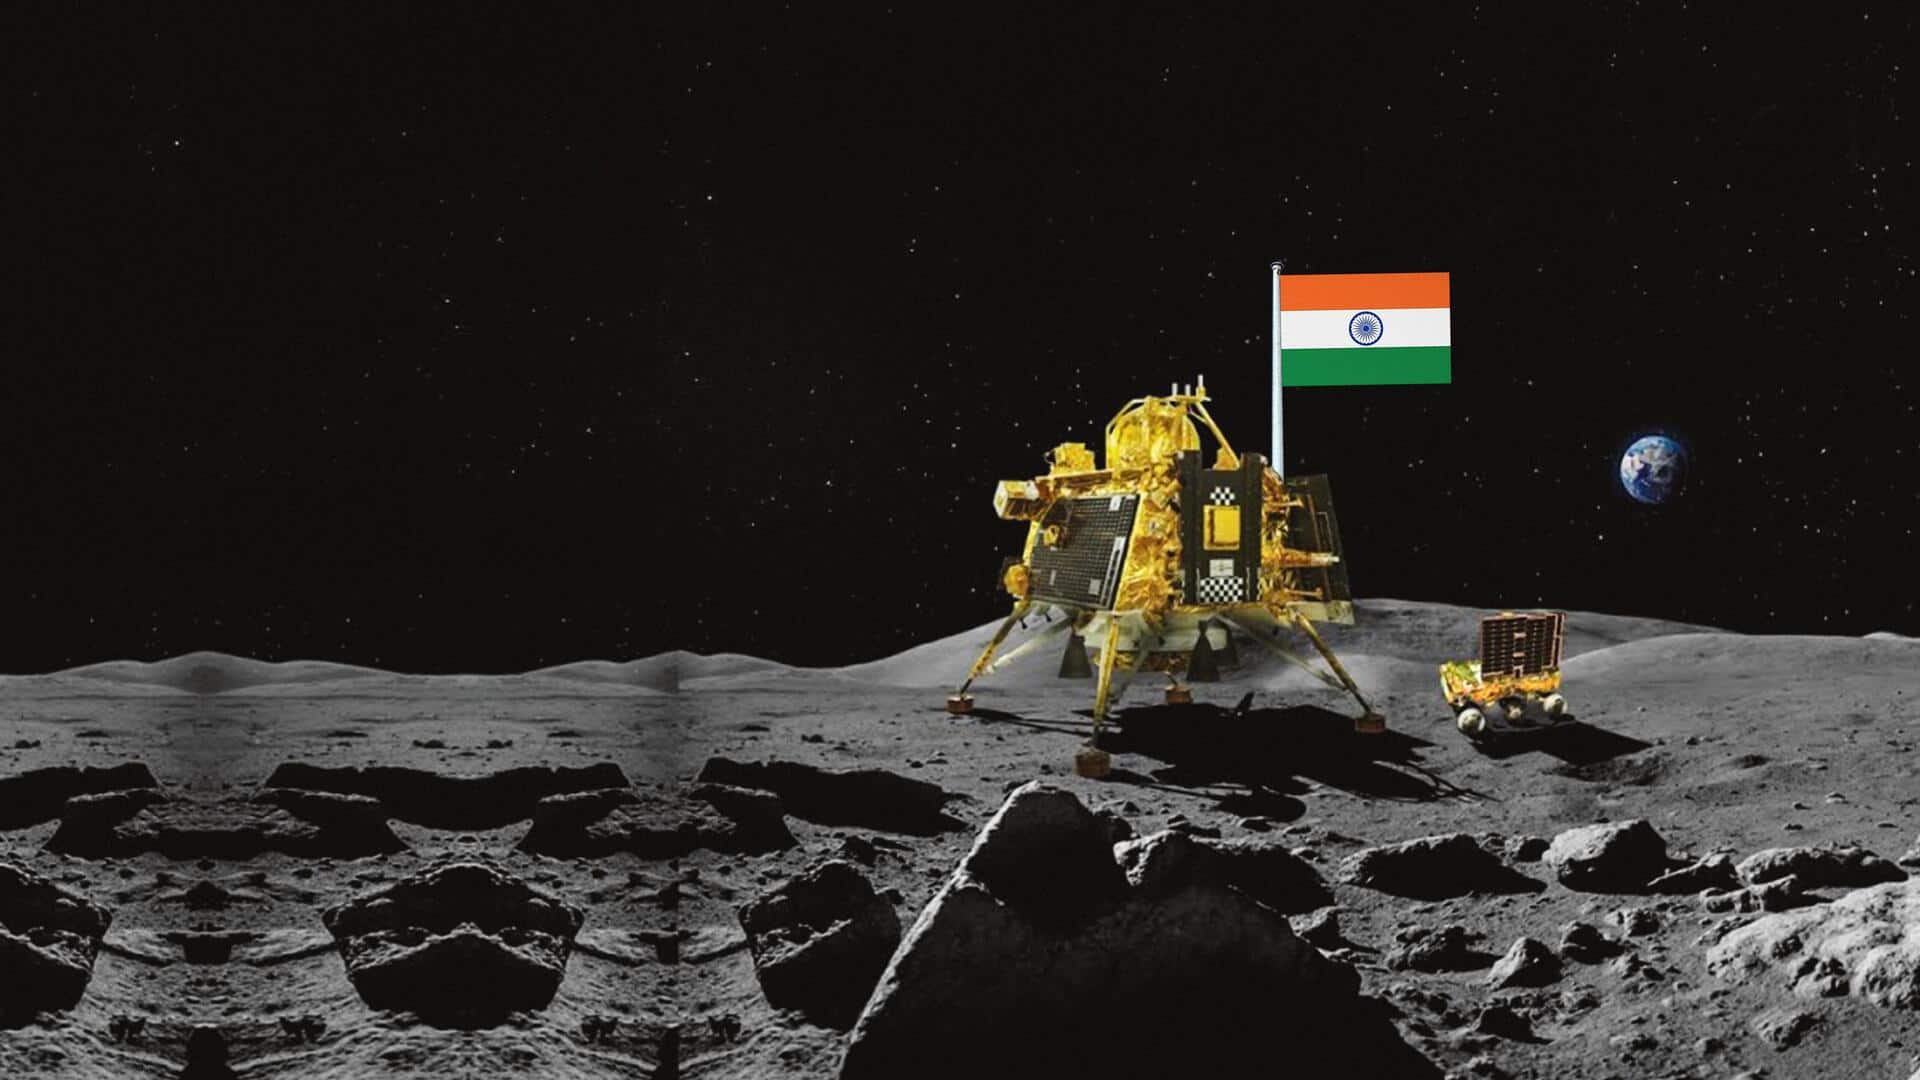 Chandrayaan-3's Pragyan rover, with payloads enabled, performs moonwalk for science